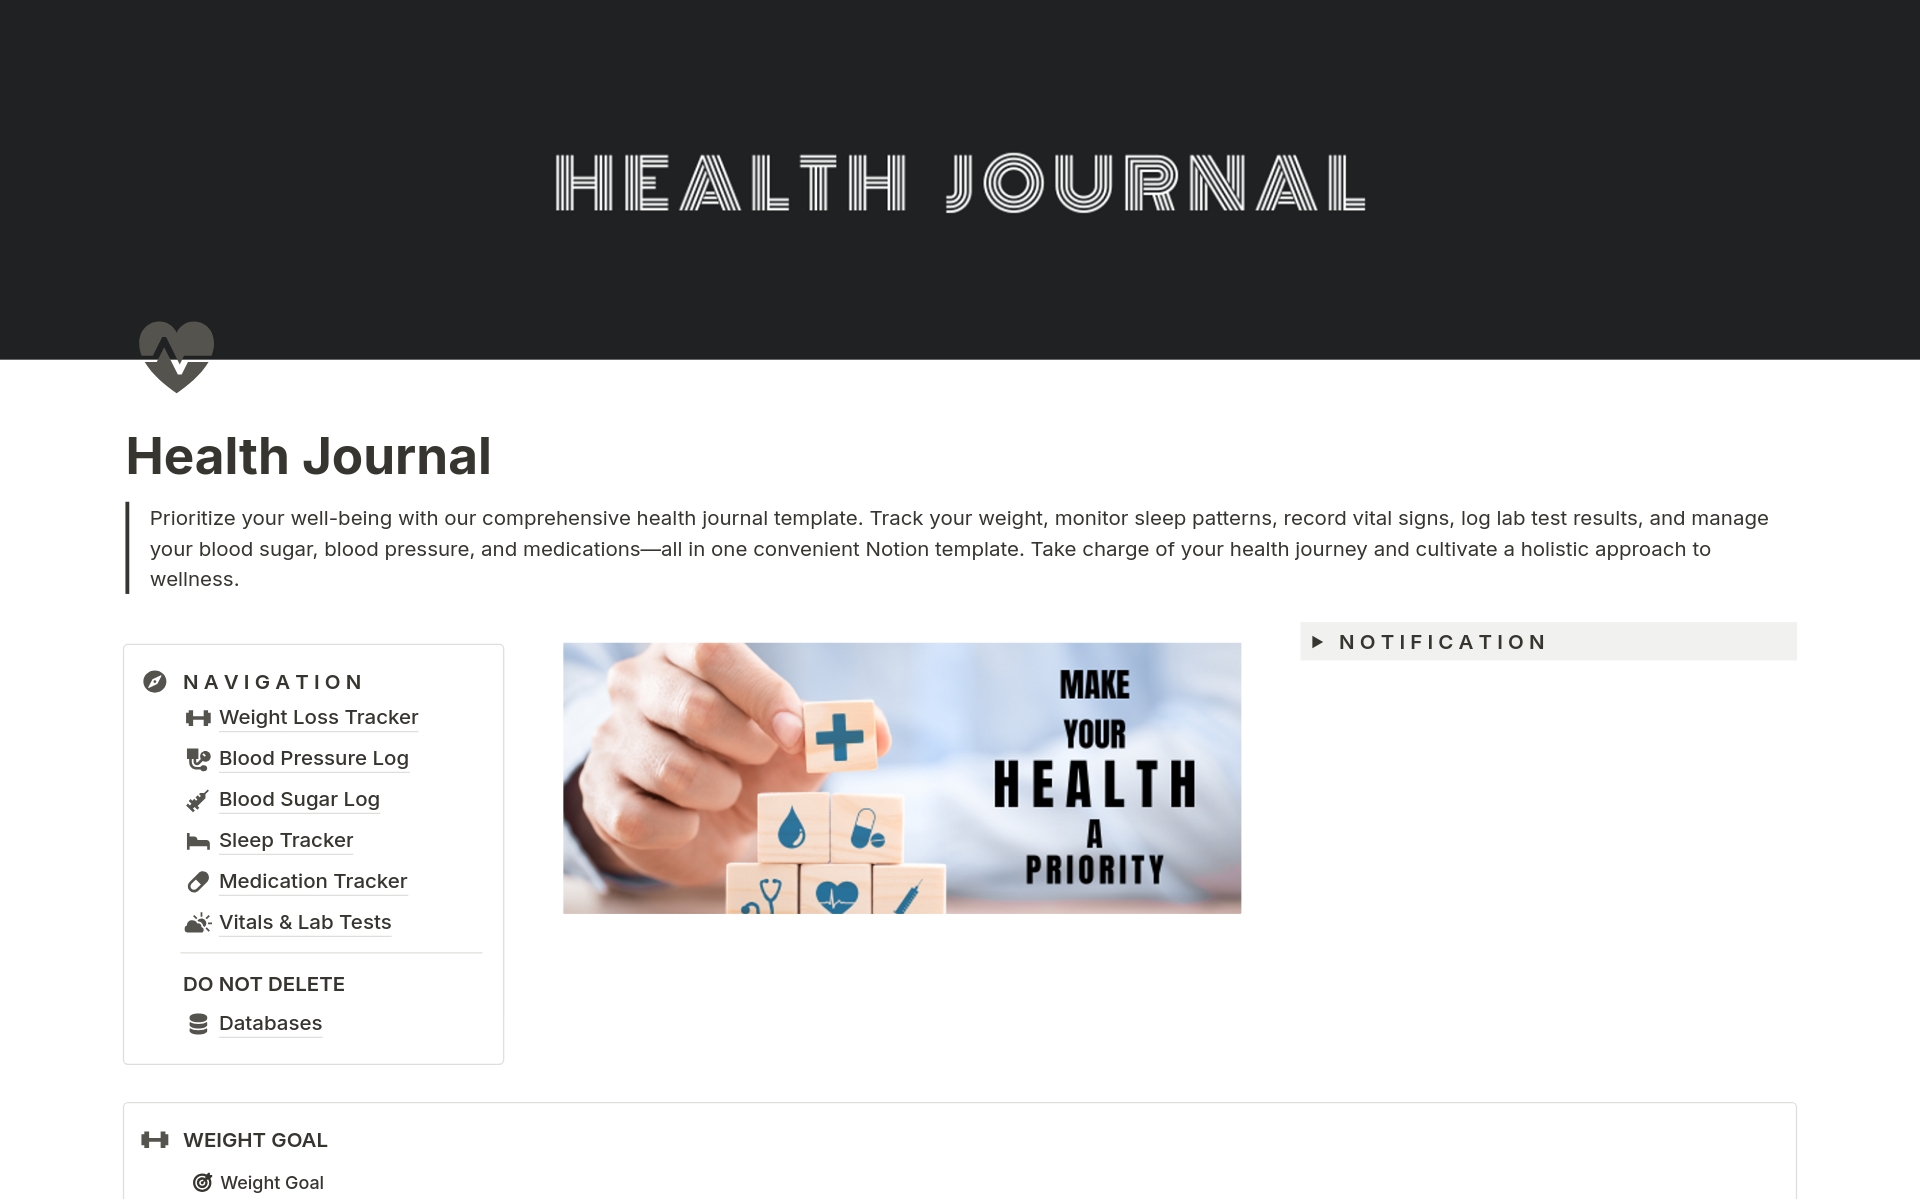 Prioritize your well-being with our comprehensive health journal template.